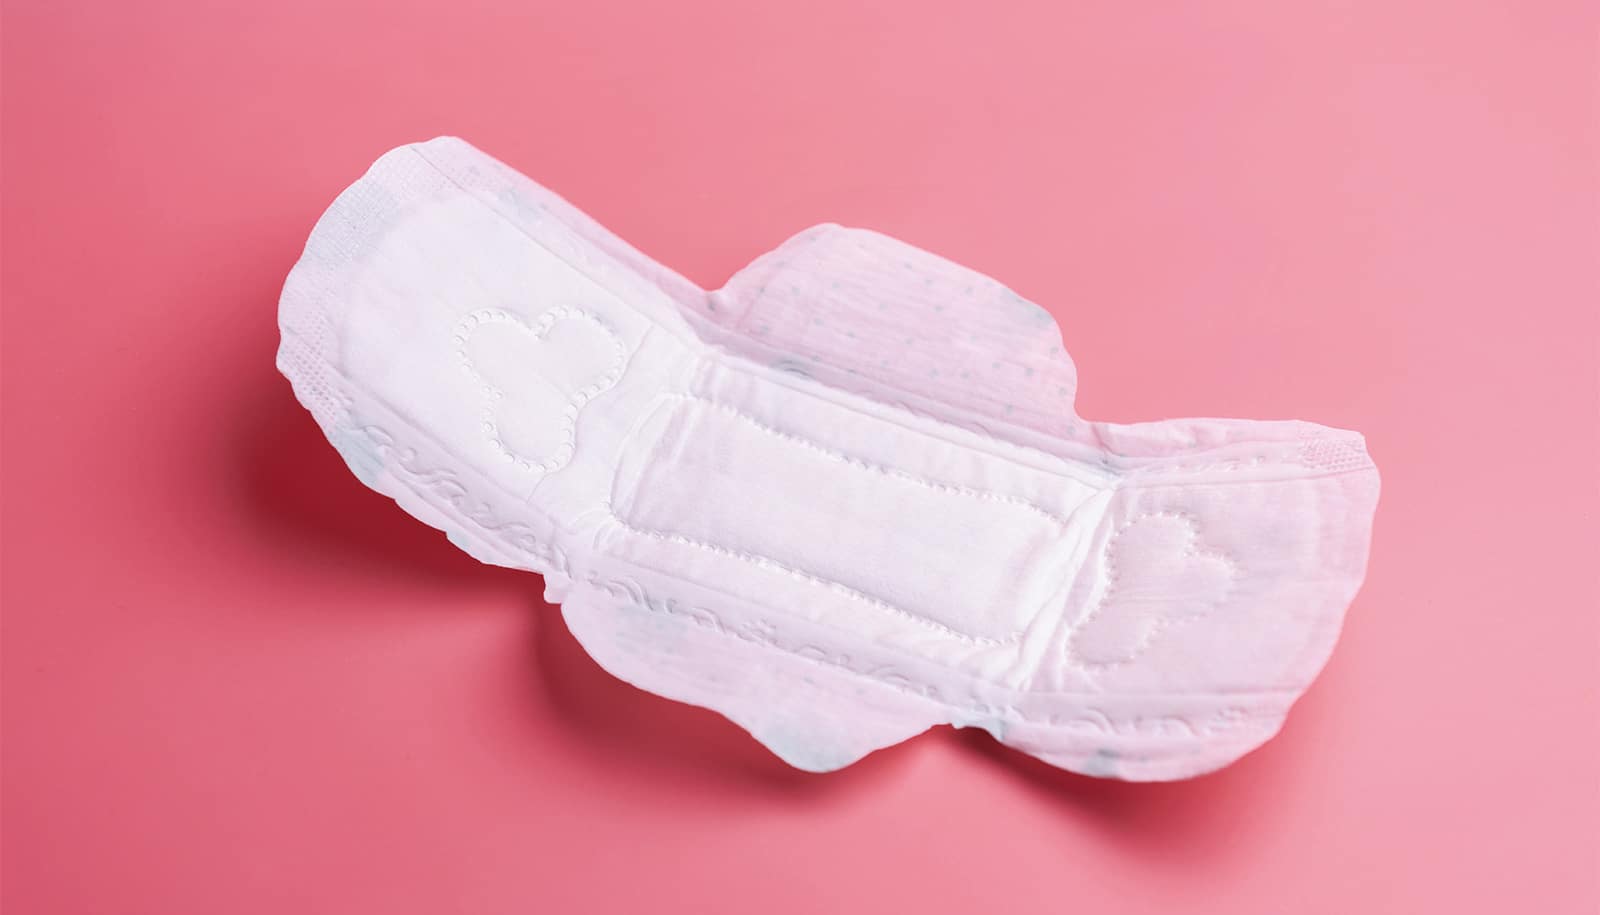 Forever chemicals' found in tampons, period underwear, and more - Futurity